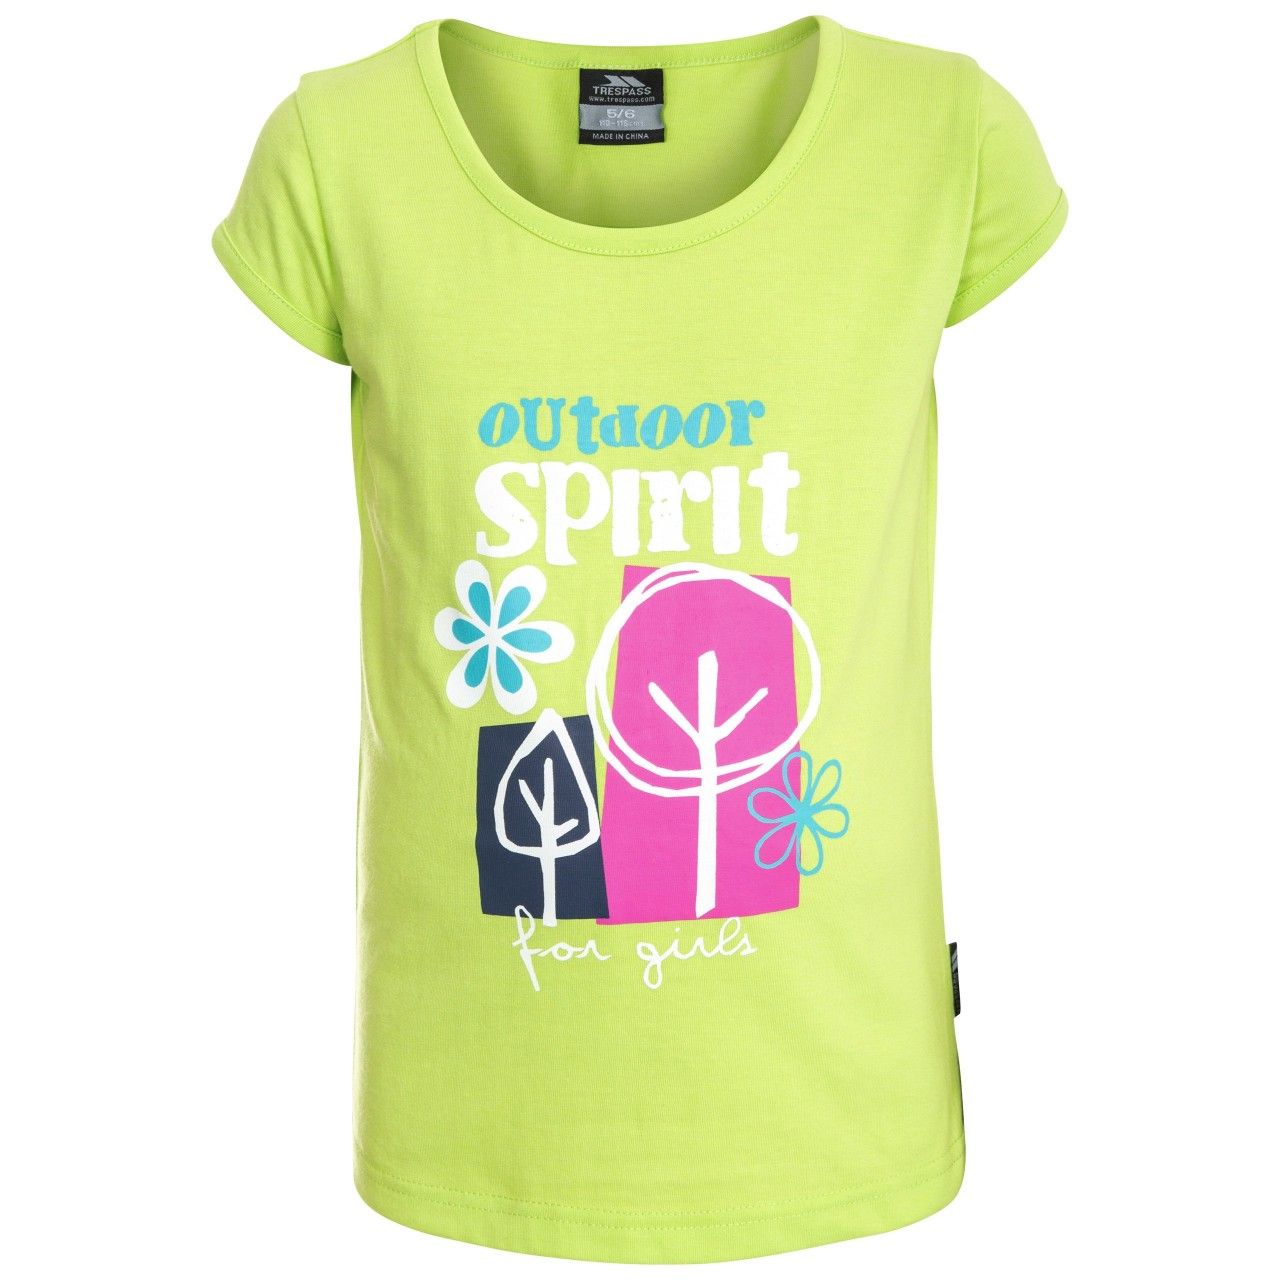 Round neck t-shirt. Front print. 50% Polyester, 50% Cotton. Trespass Childrens Chest Sizing (approx): 2/3 Years - 21in/53cm, 3/4 Years - 22in/56cm, 5/6 Years - 24in/61cm, 7/8 Years - 26in/66cm, 9/10 Years - 28in/71cm, 11/12 Years - 31in/79cm.